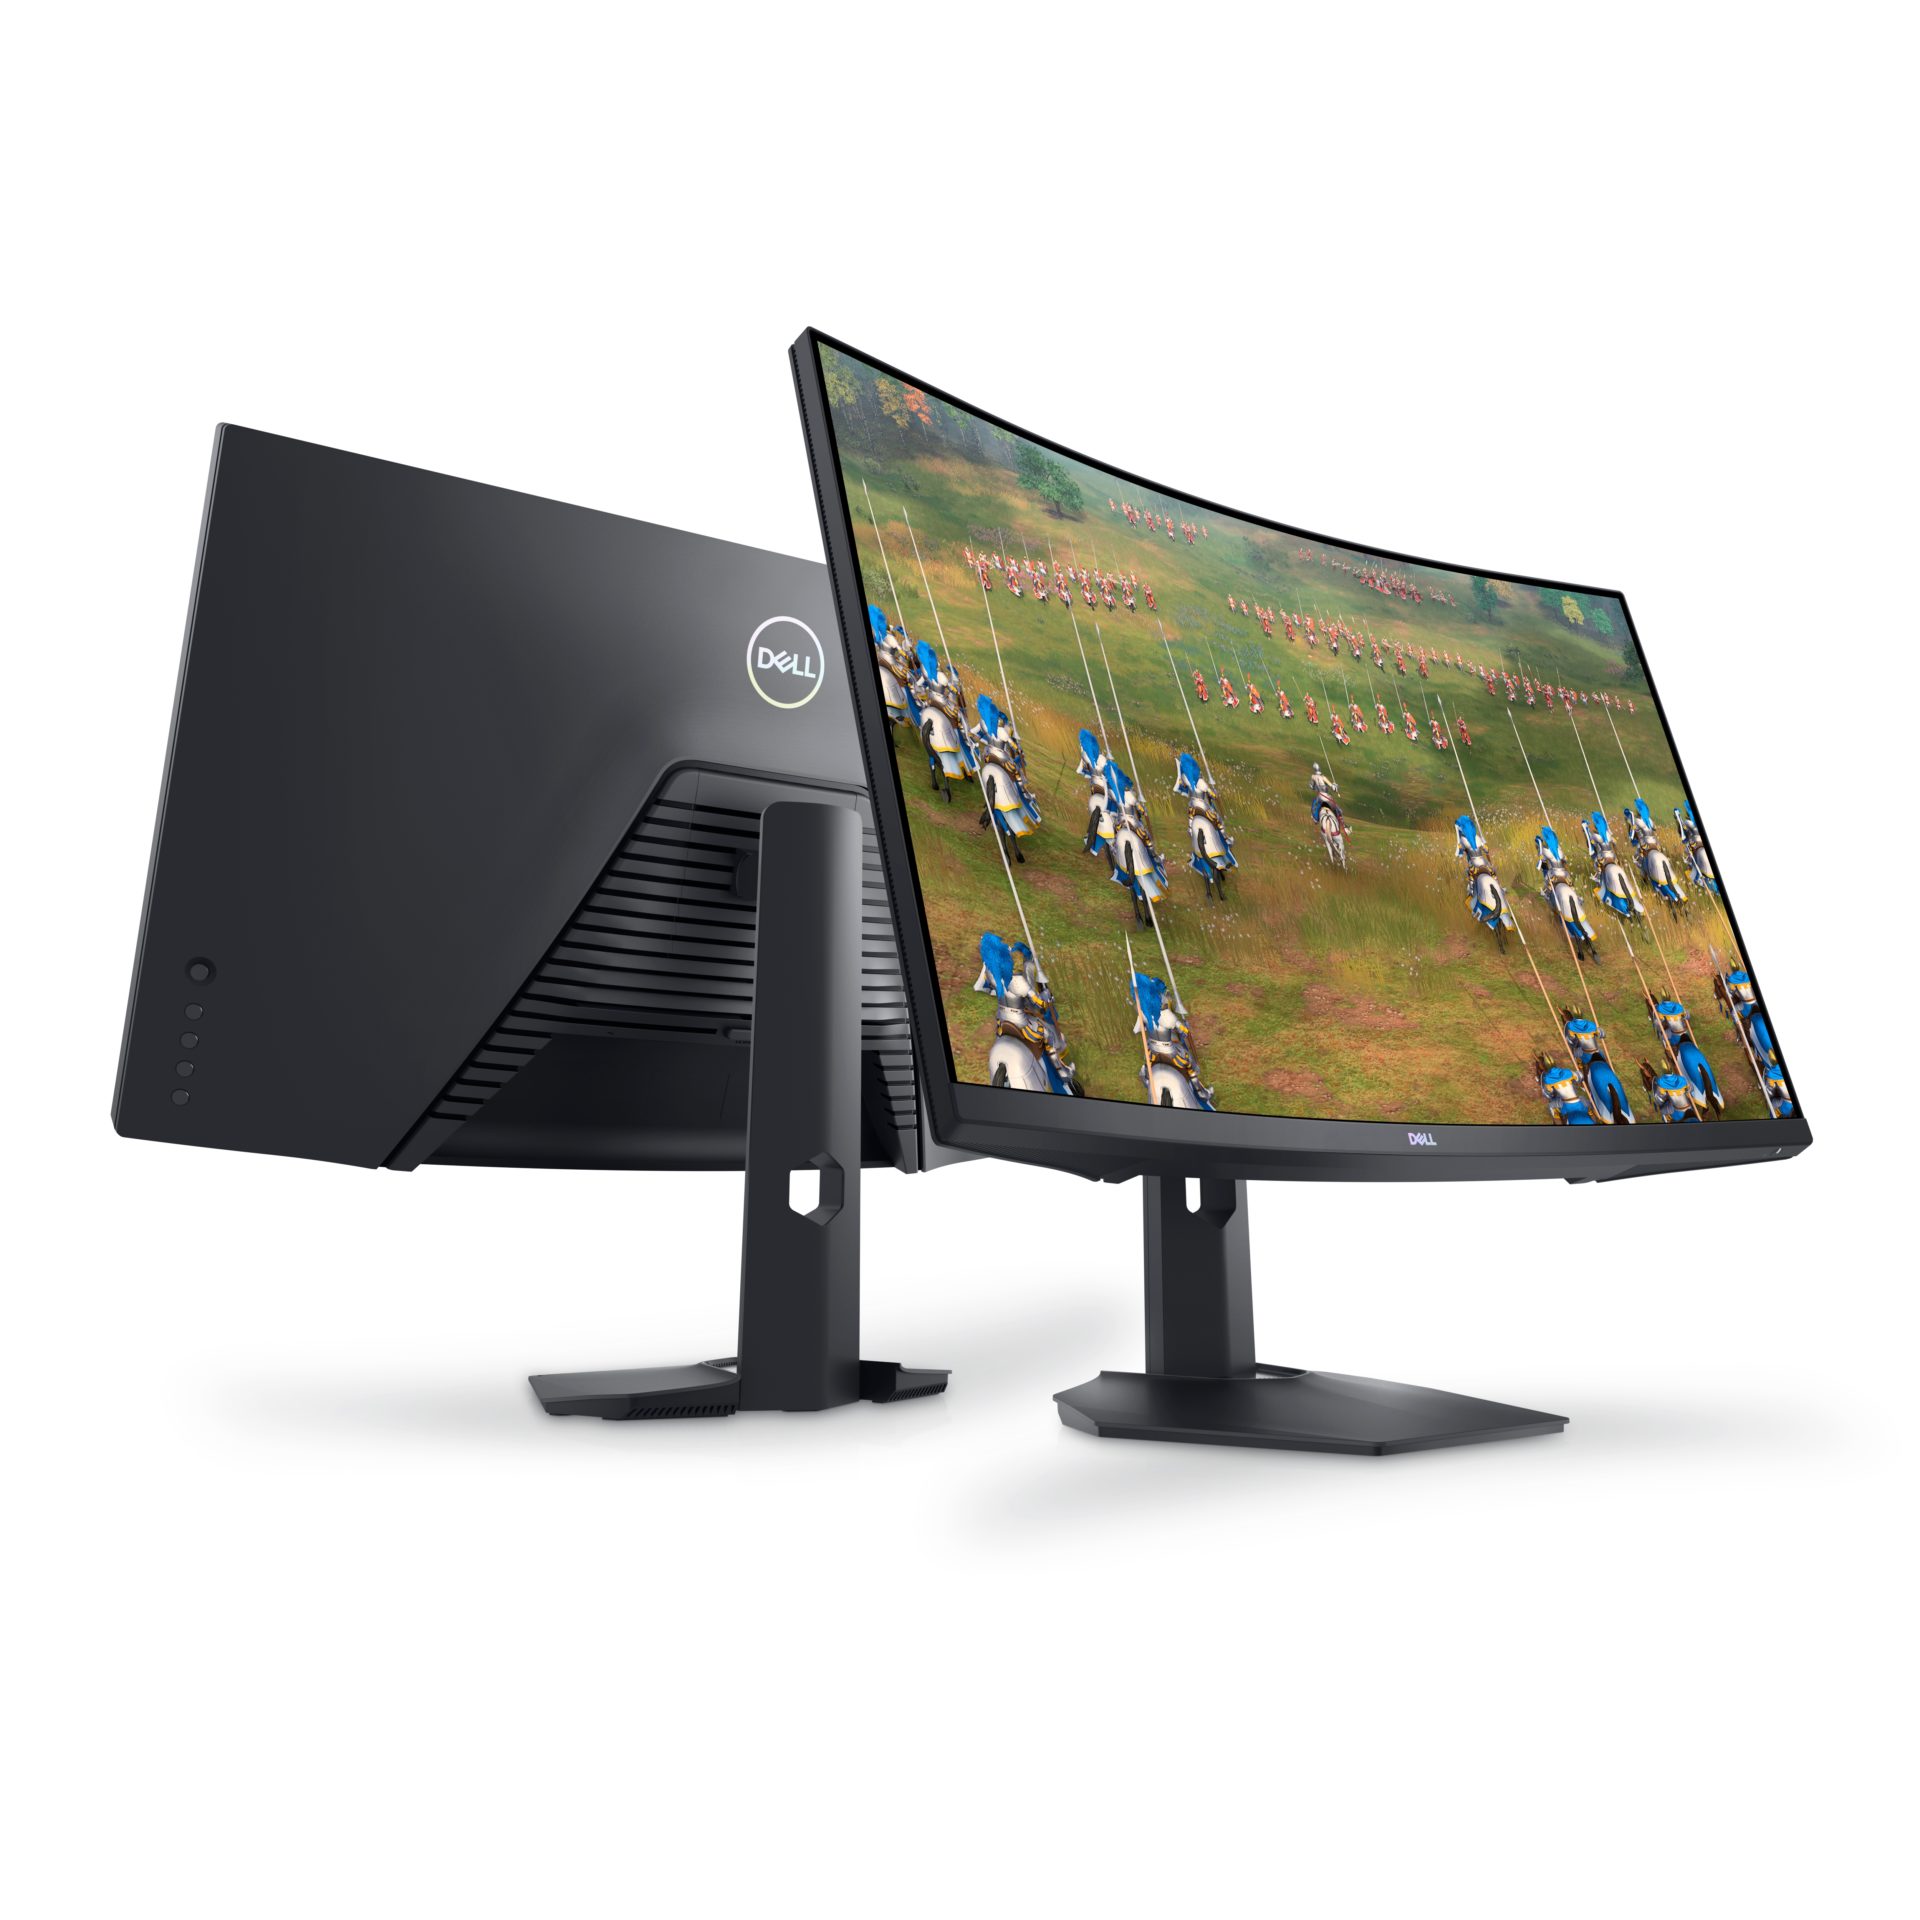 How To Turn On A Dell Monitor